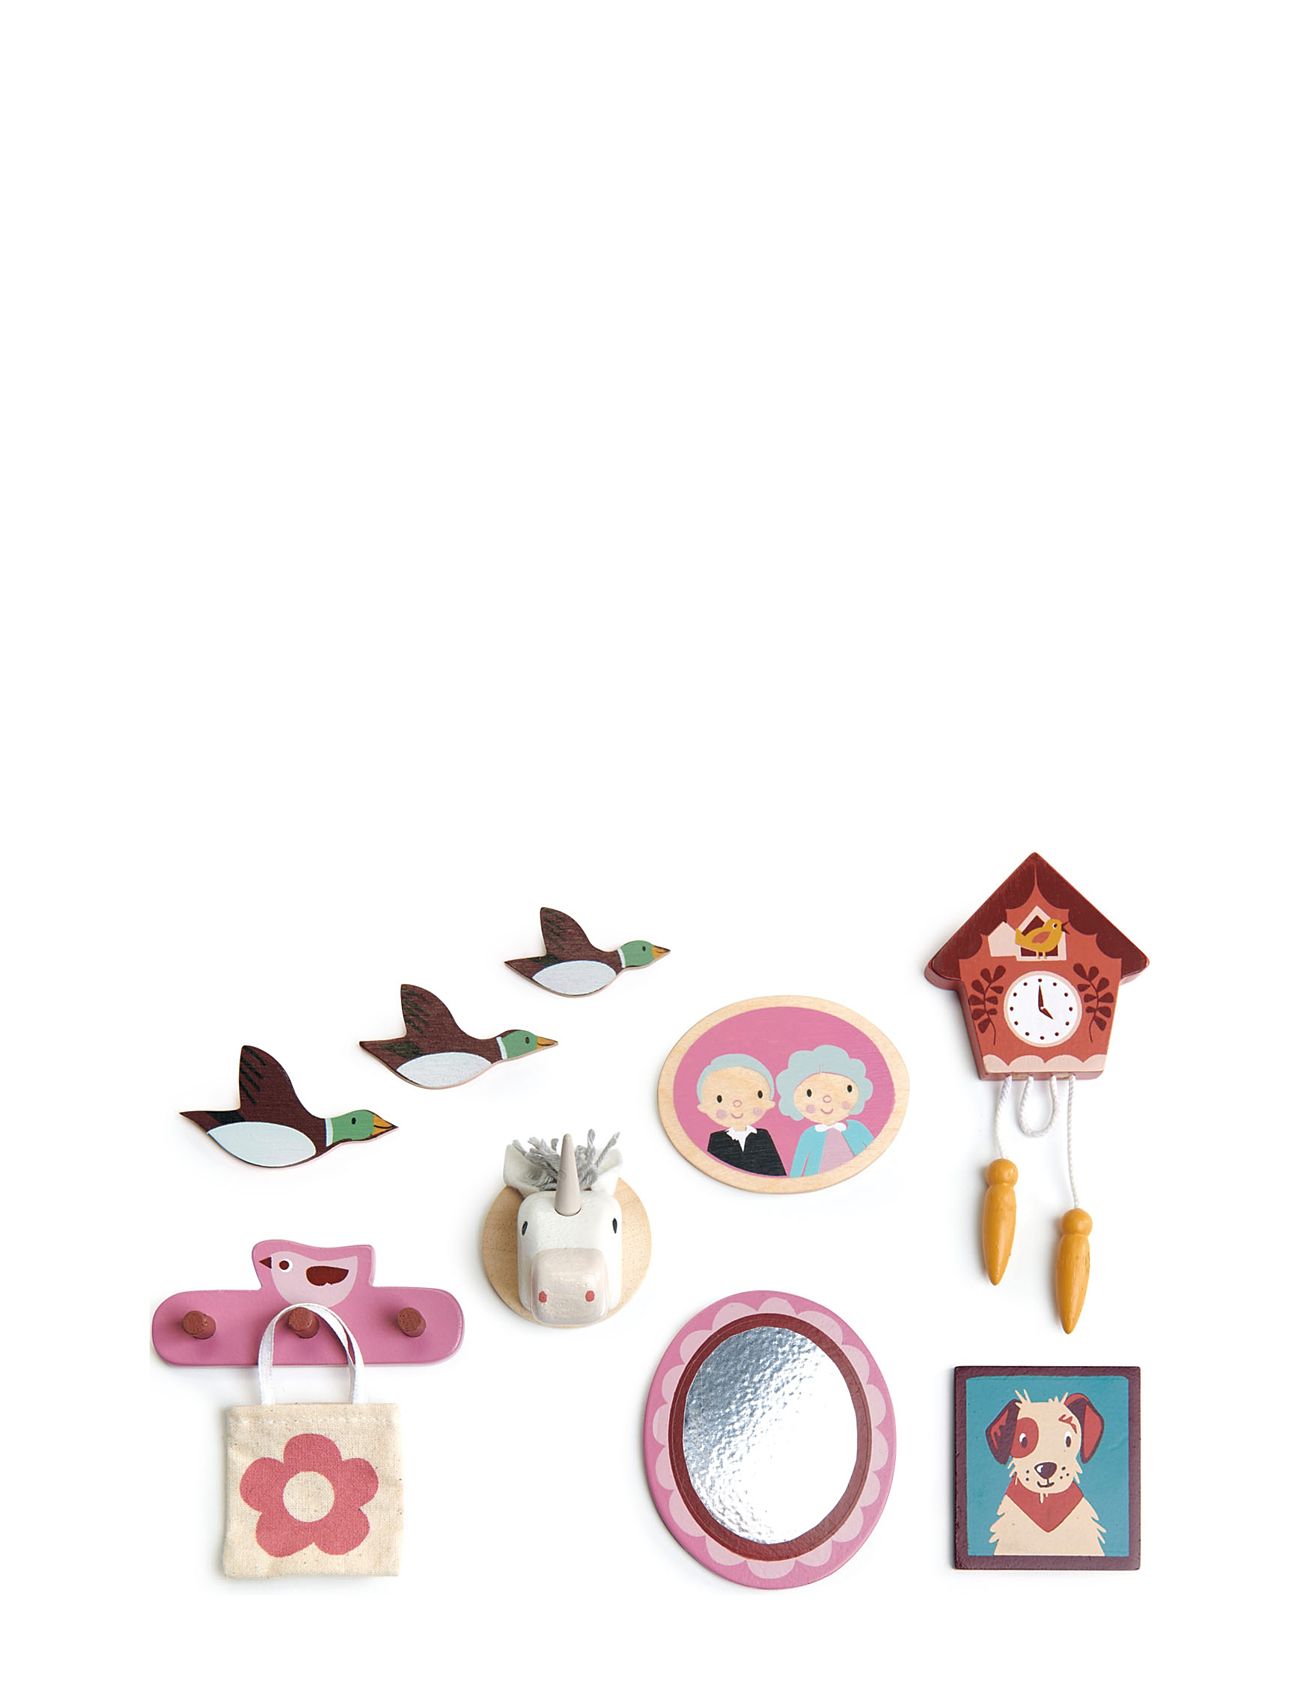 Doll House Wall Décor Toys Playsets & Action Figures Wooden Figures Multi/patterned Tender Leaf